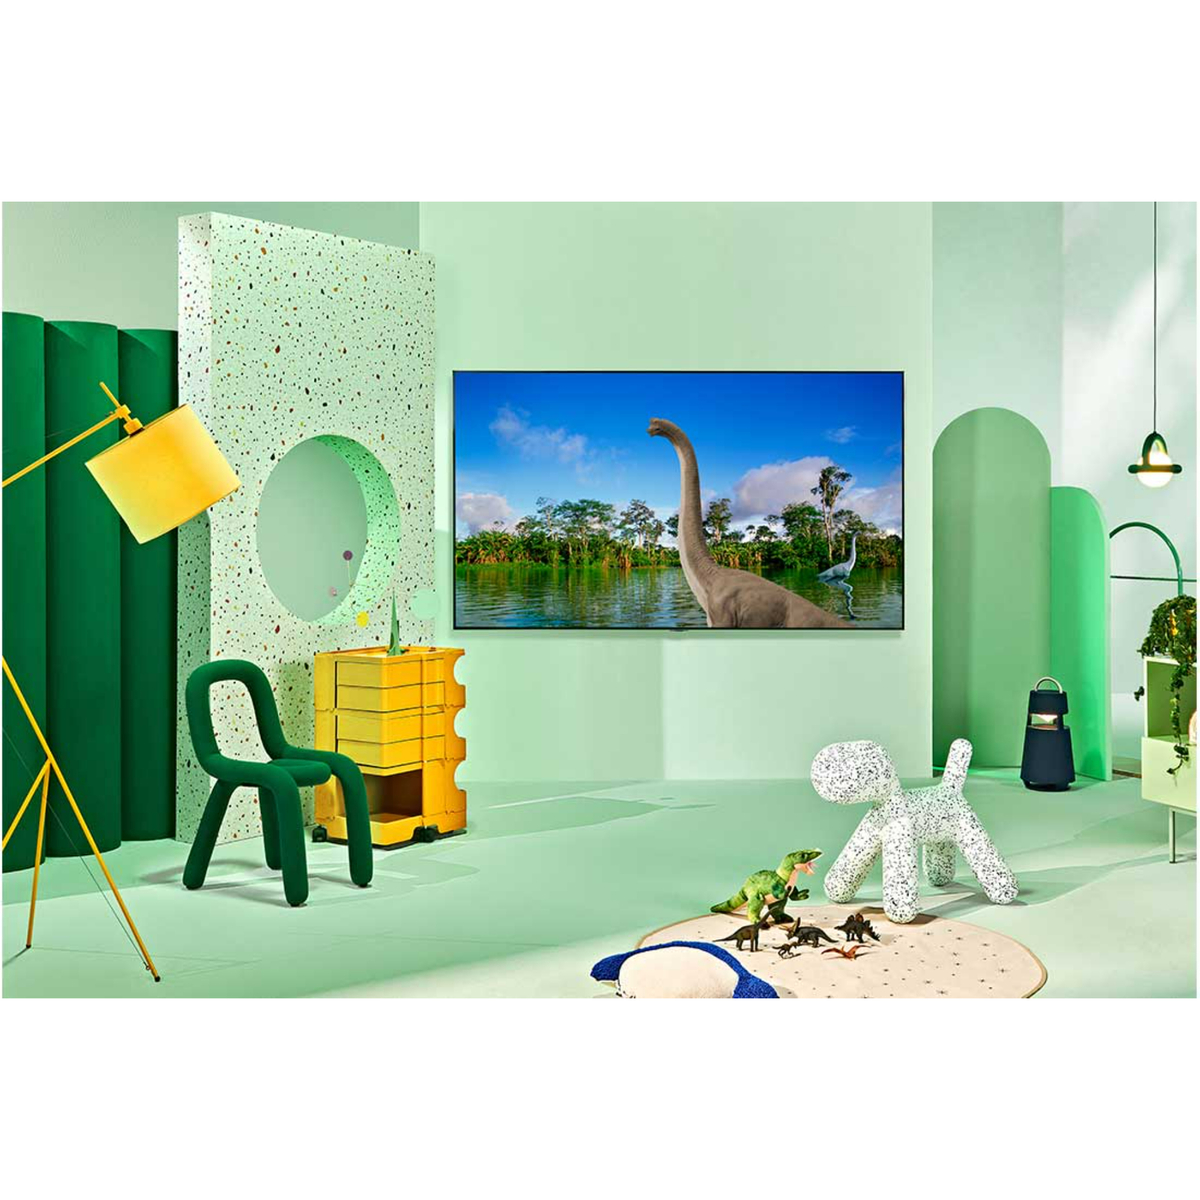 LG 86 inches 8K Smart QNED TV, 86QNED996QB